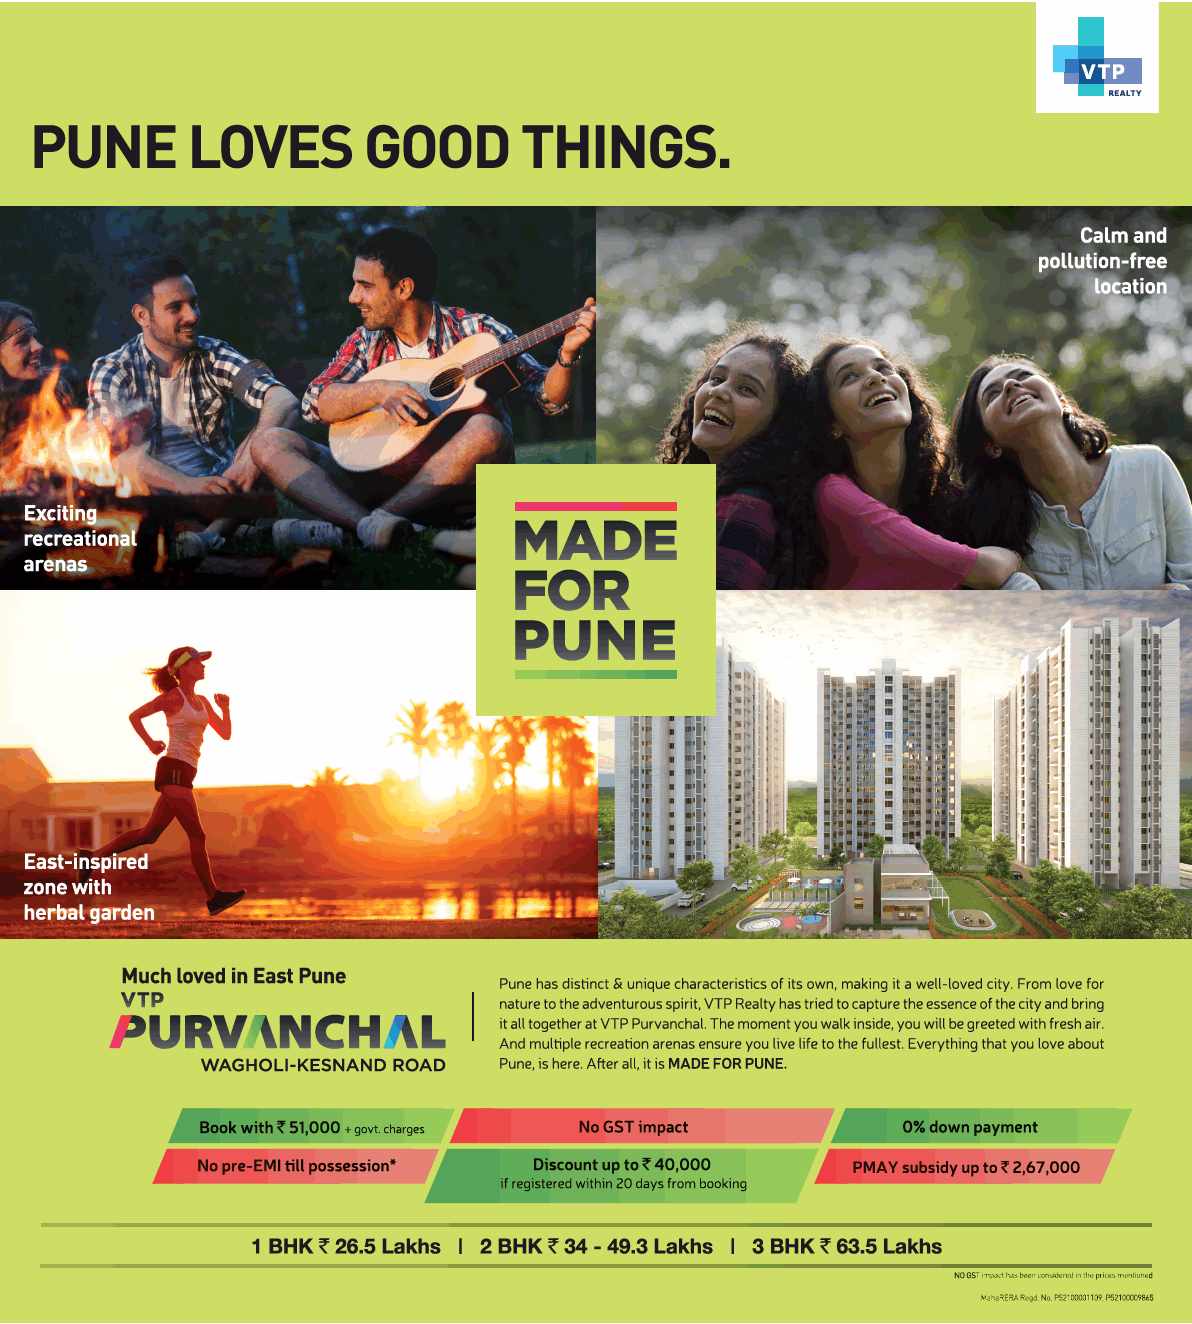 Reside in calm and pollution free location at VTP Purvanchal in Pune Update